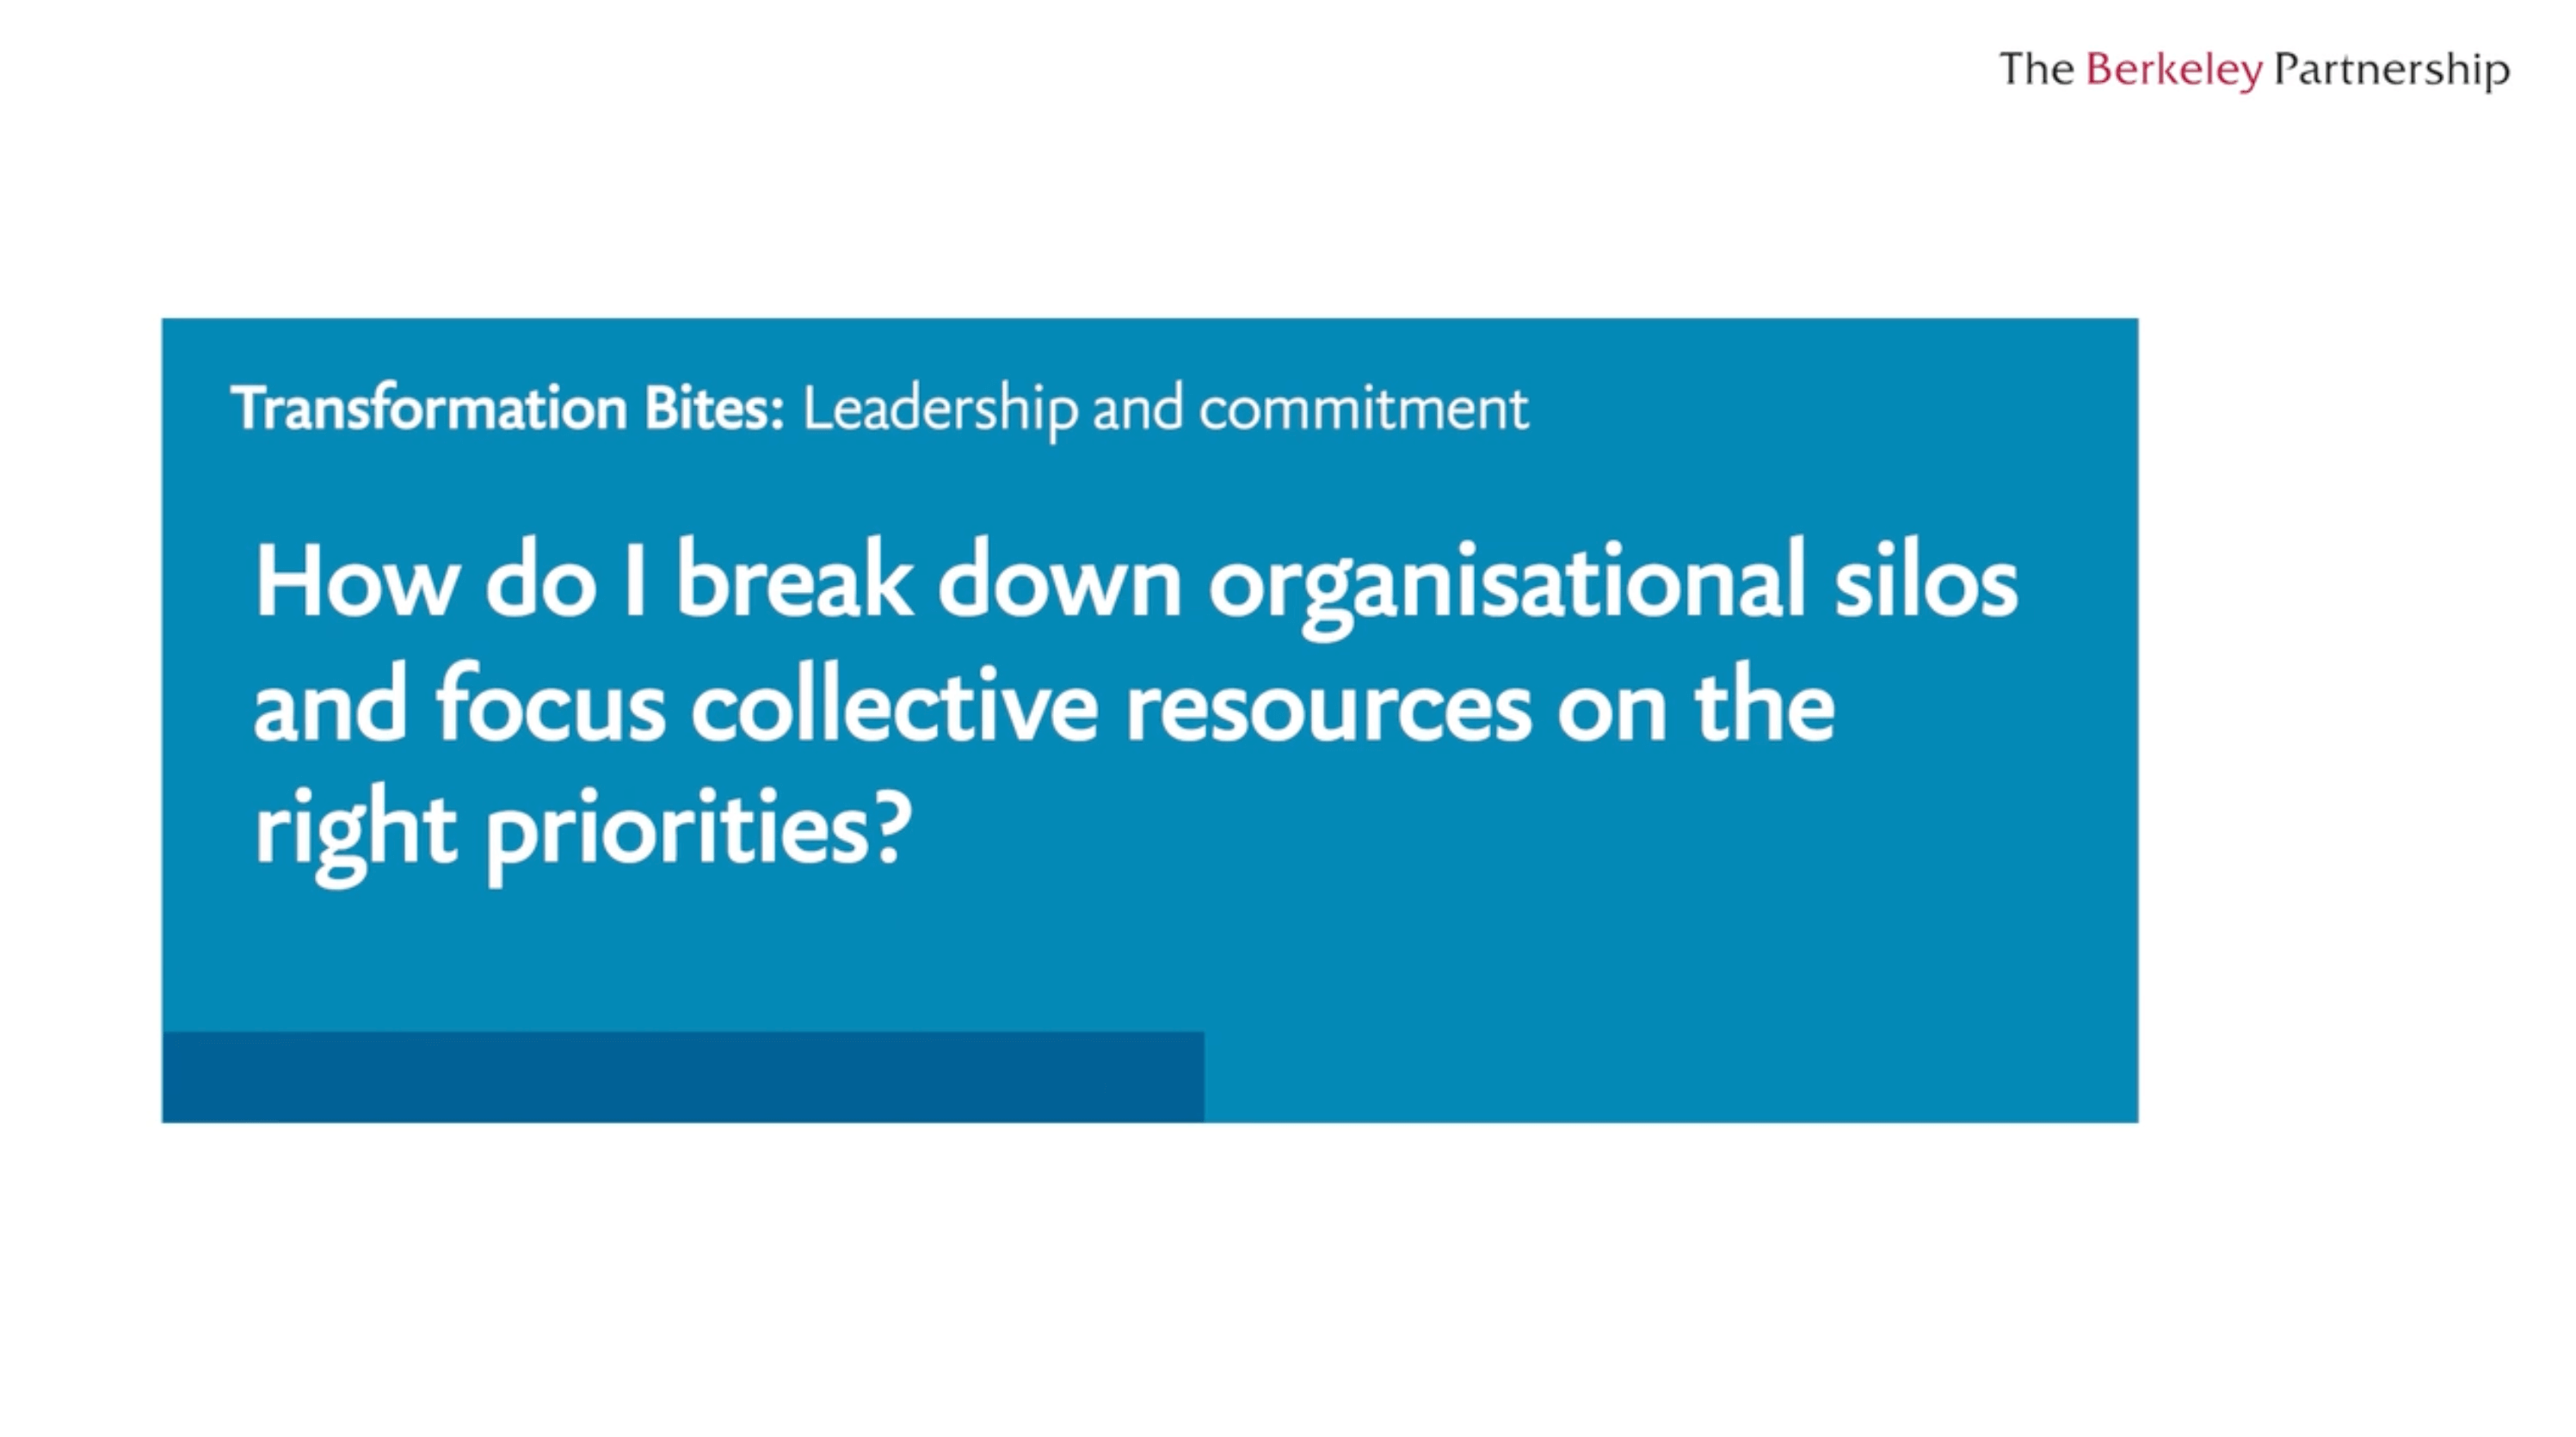 How do I break down organizational silos and focus collective resources on the right priorities?